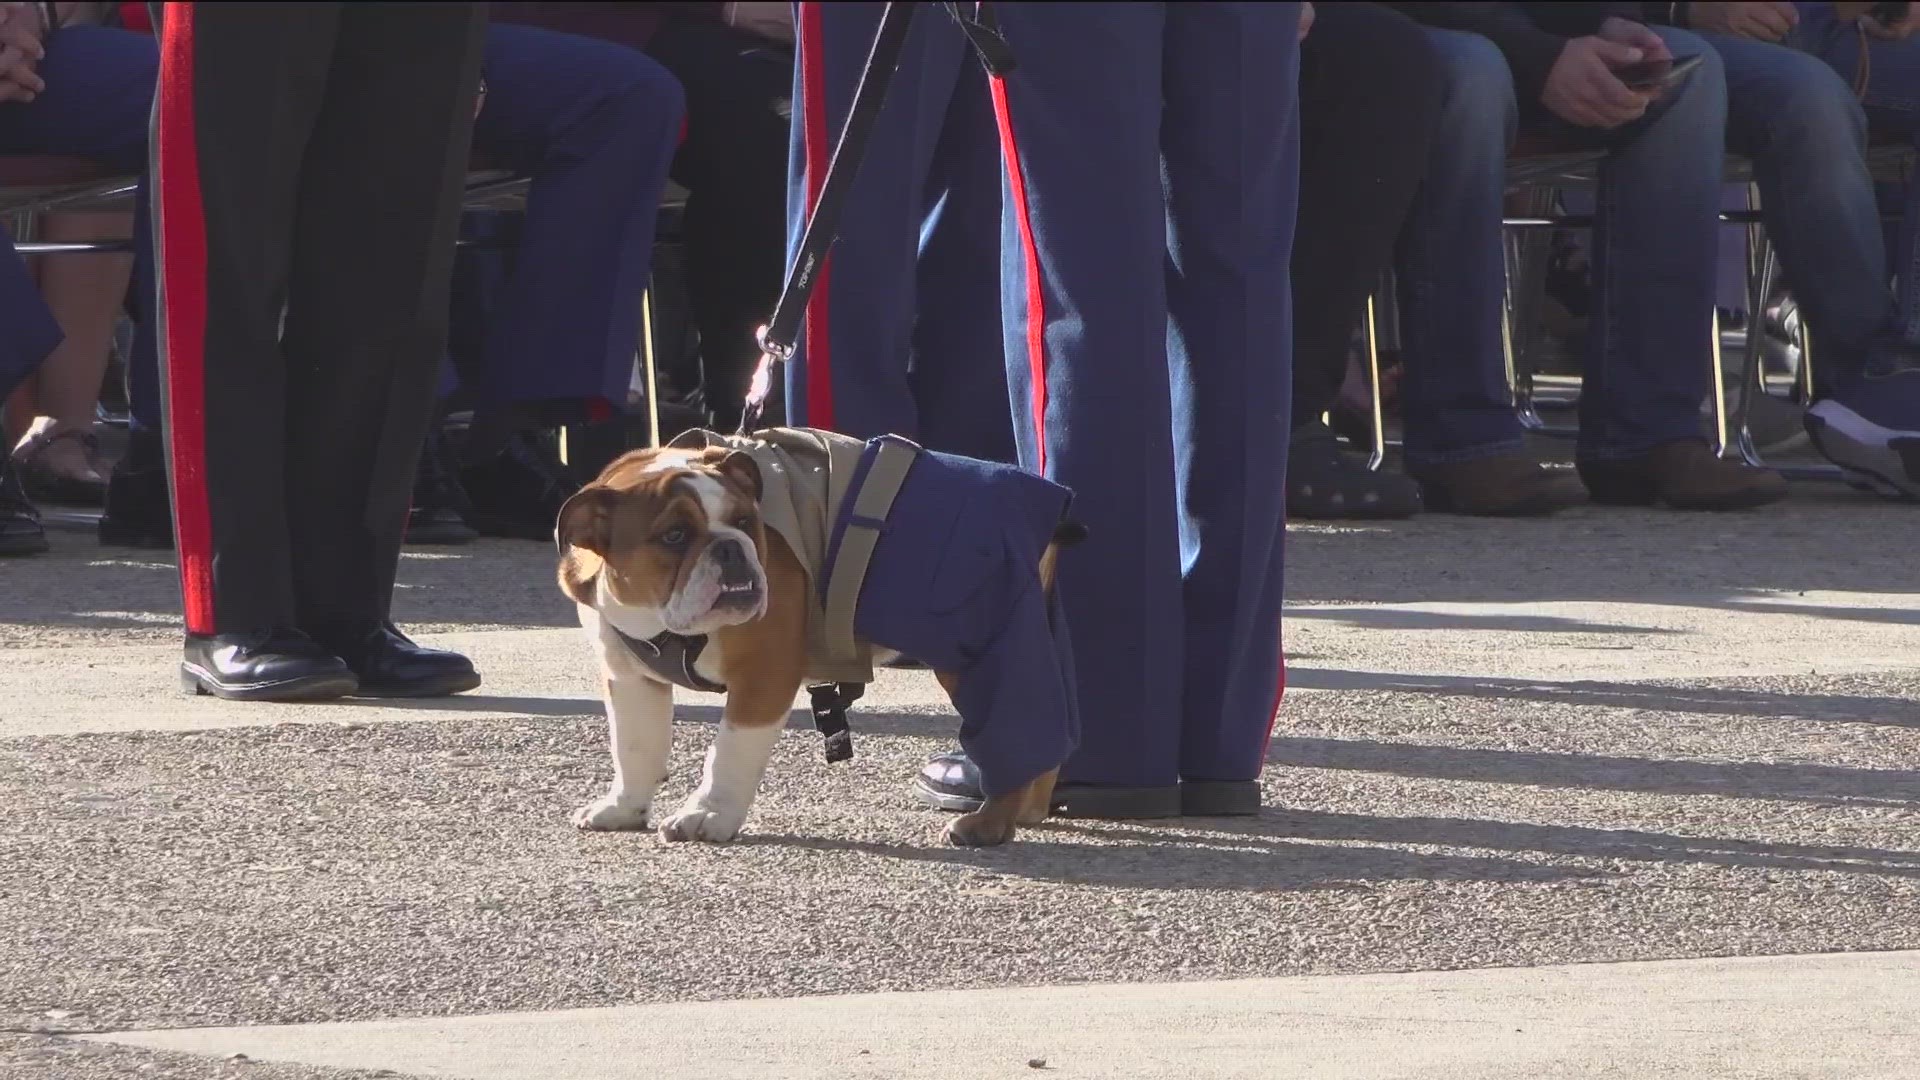 Private Bruno Hochmuth is a five-month-old English Bulldog who now serves as the mascot for the Marine Corps Recruit Depot.